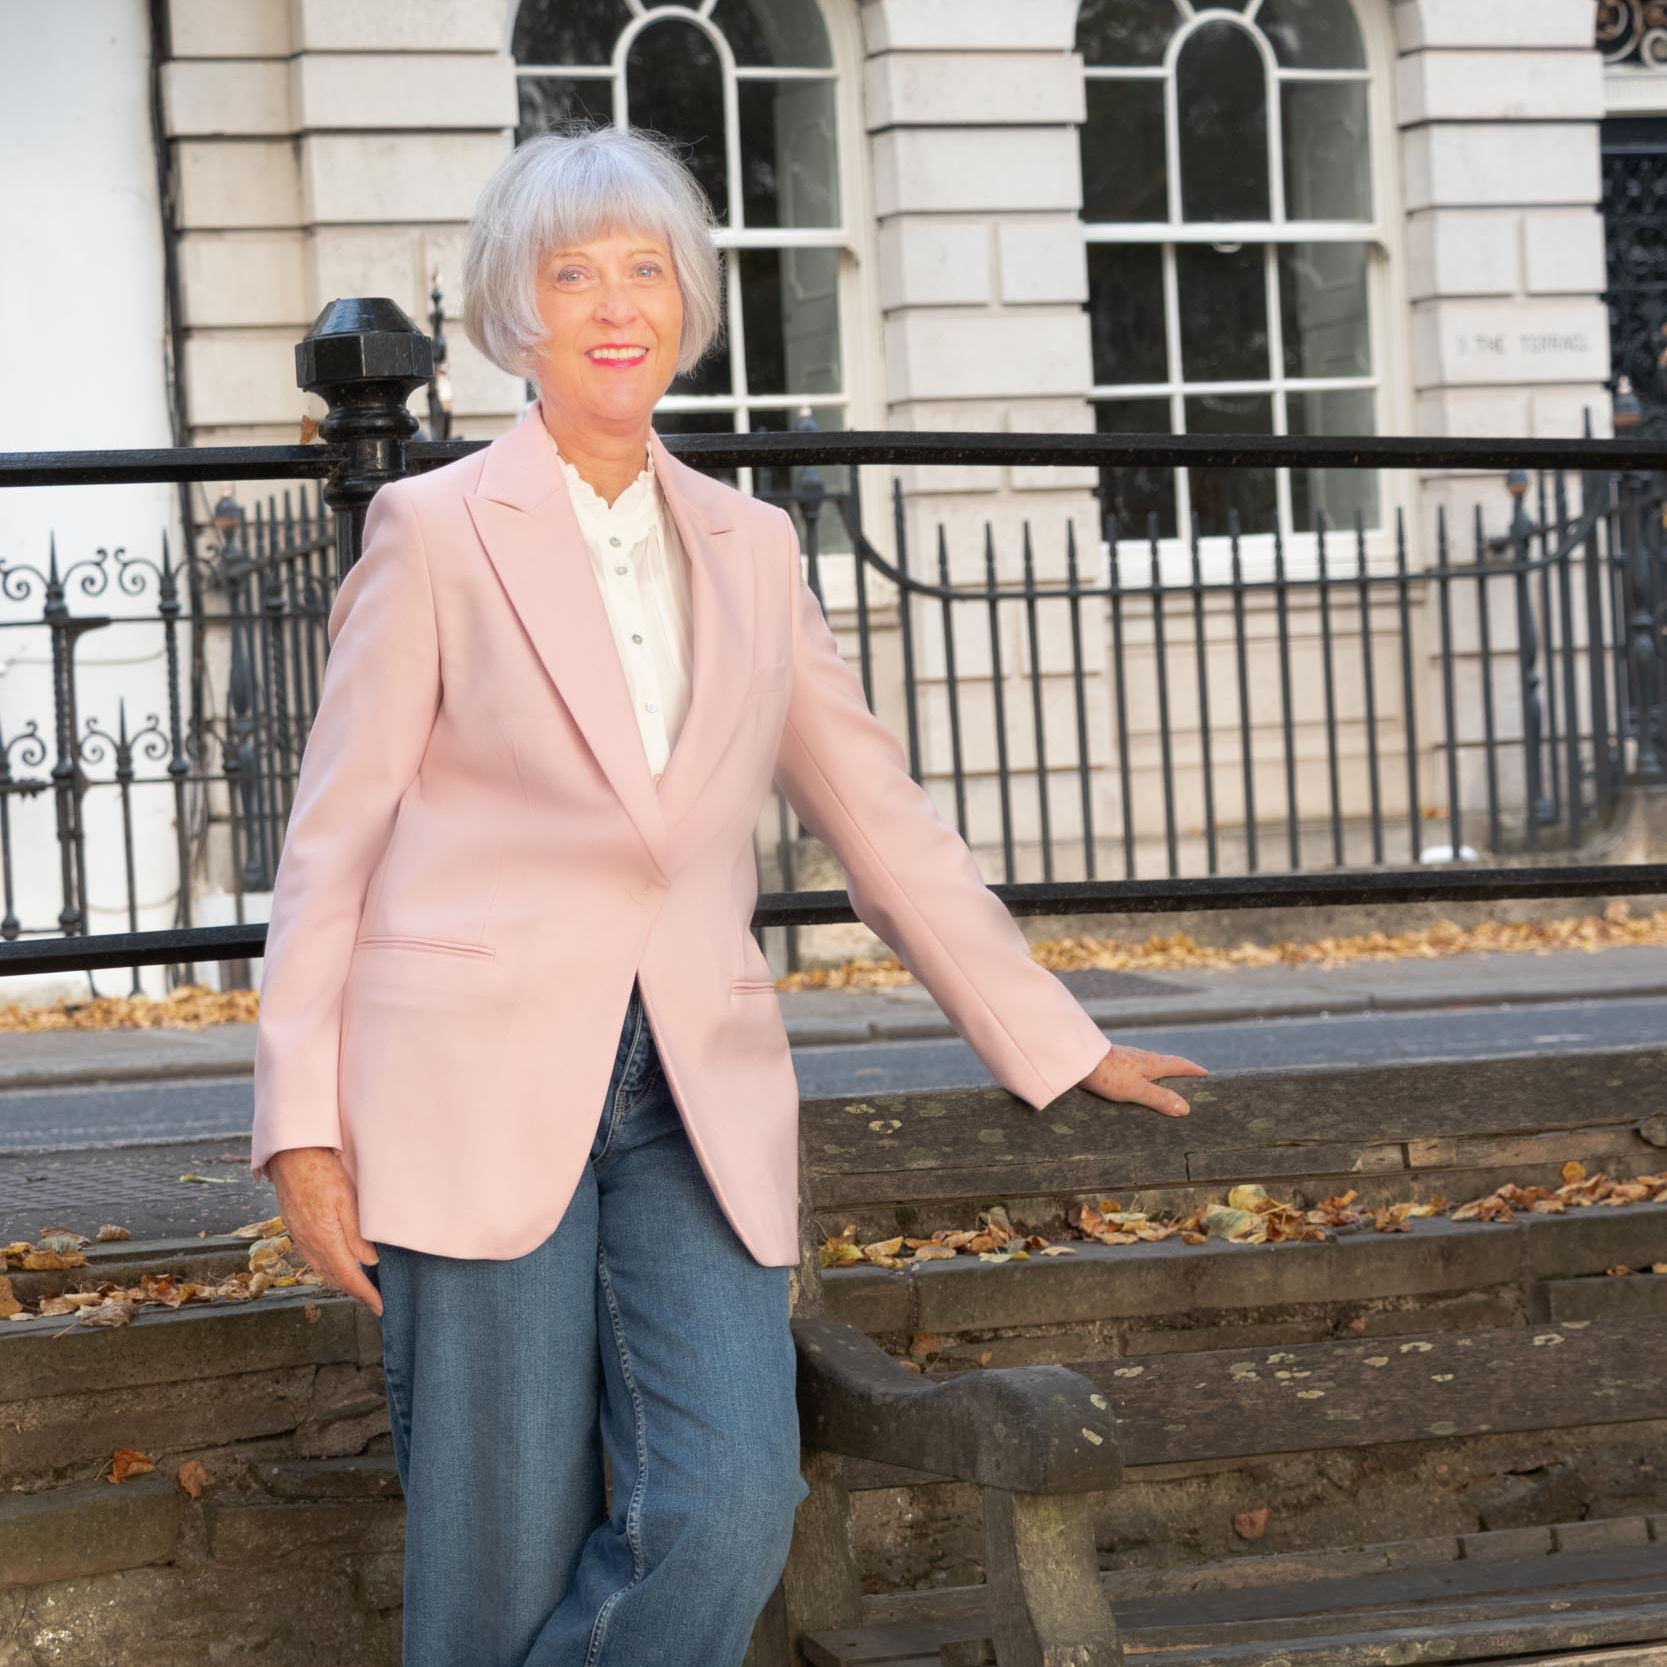 How to dress up a pair of jeans with a classic jacket - Chic at any age